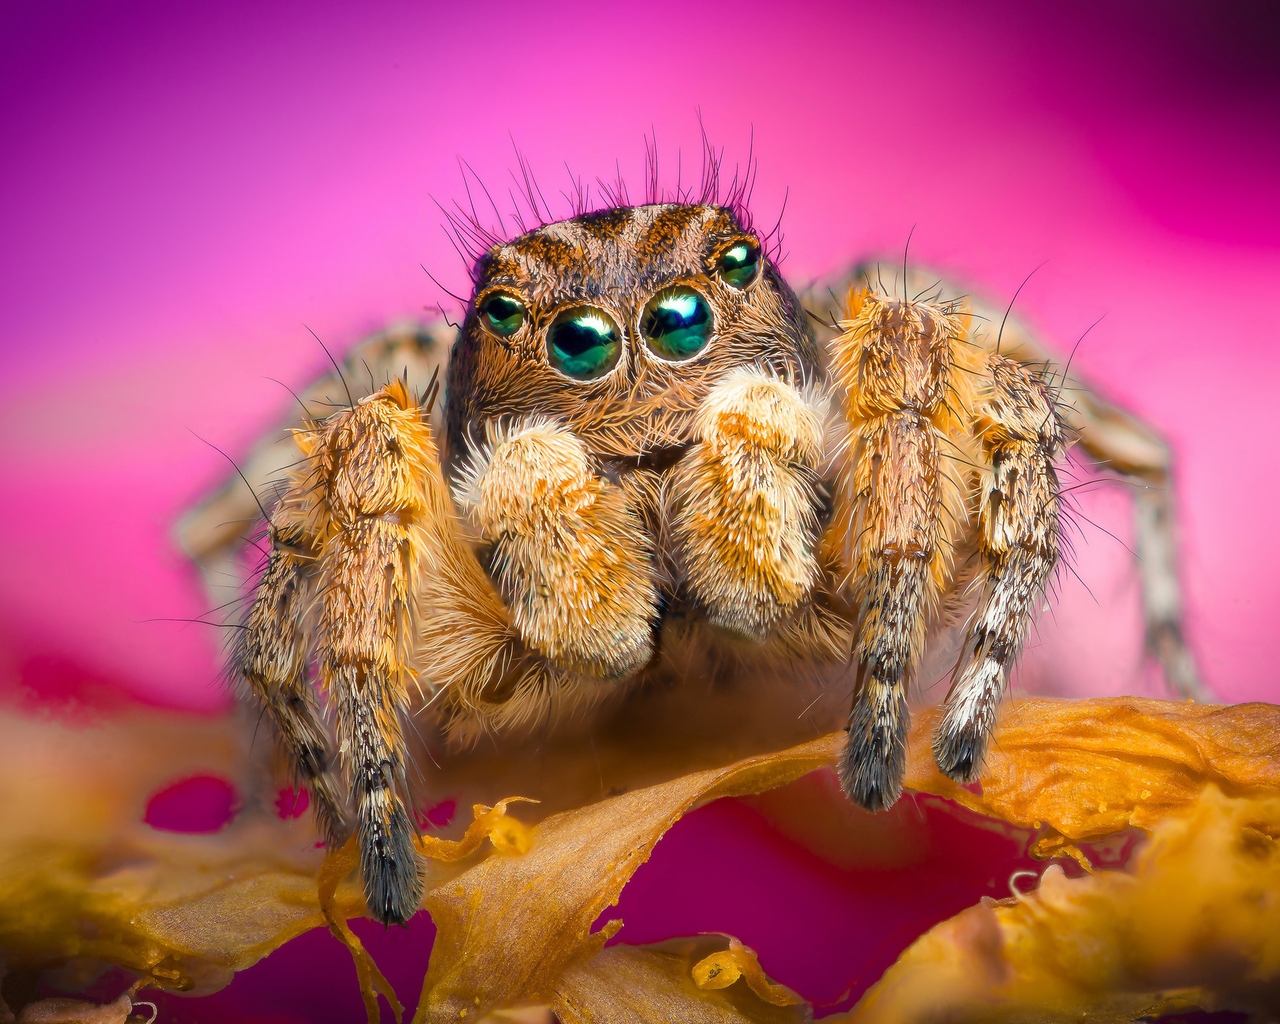 Jumping Spider for 1280 x 1024 resolution